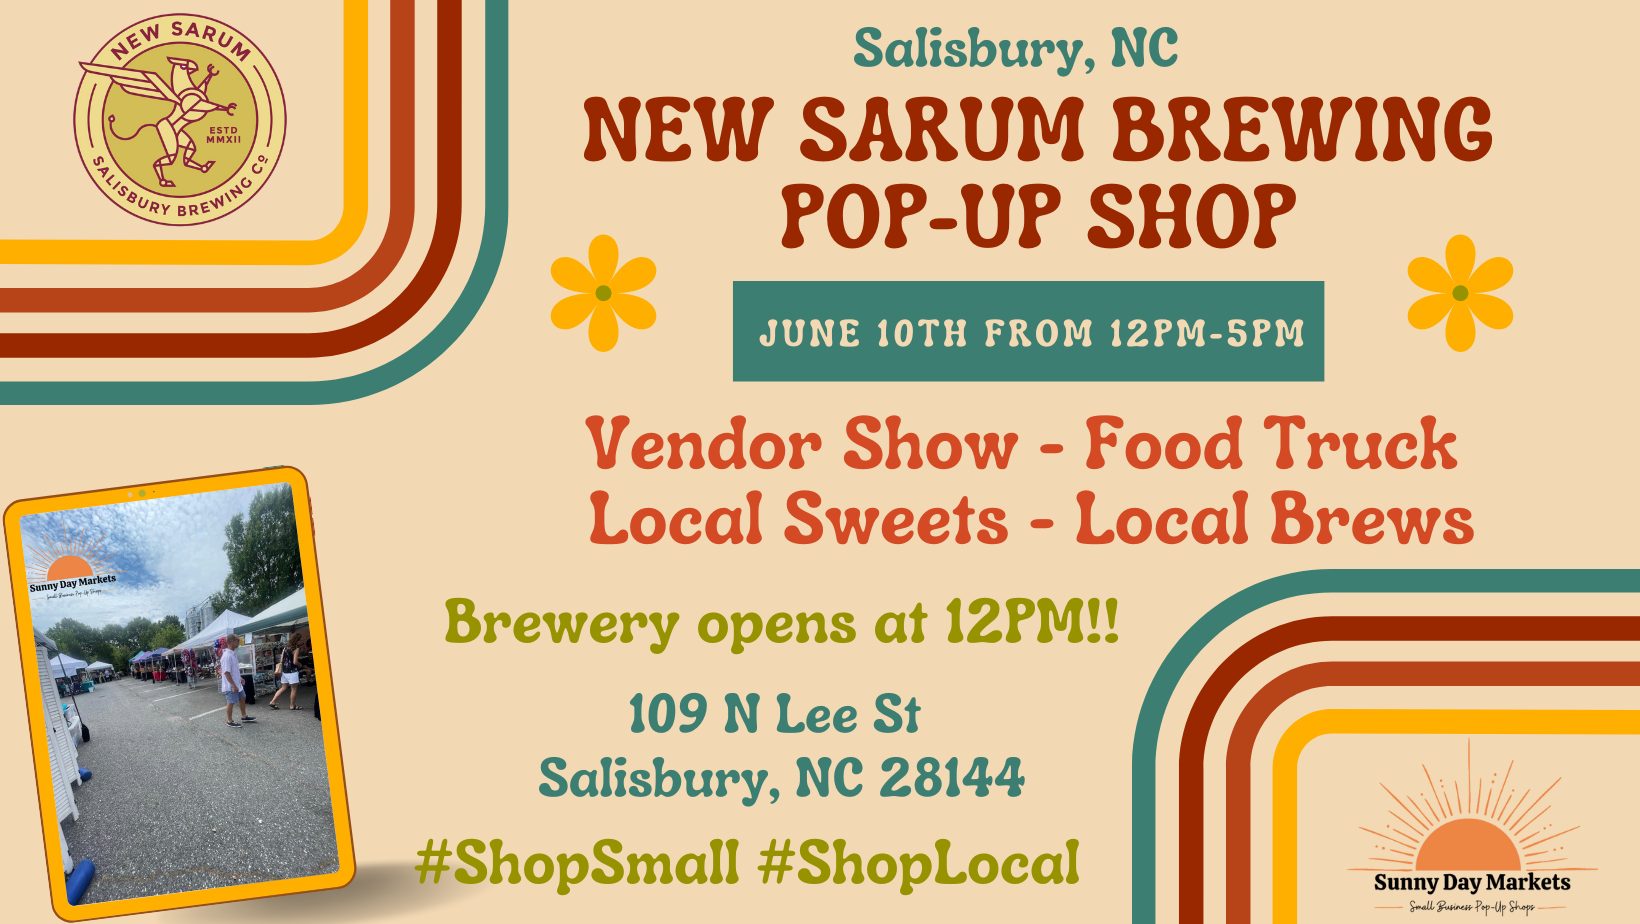 Sunny Day Markets Presents - New Sarum Brewing Pop-up 6/10